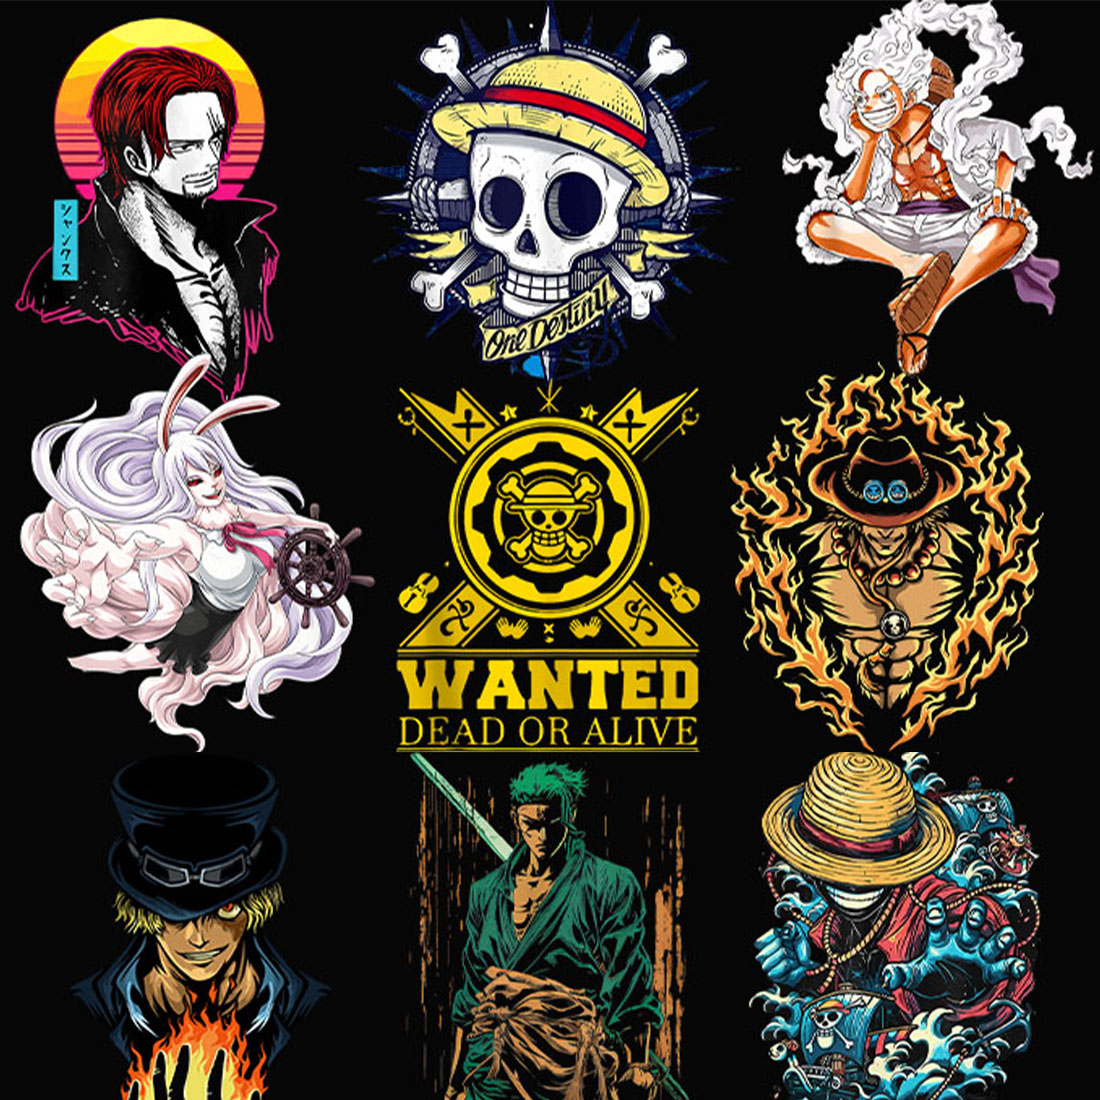 Anime One Piece T-Shirts for Sale